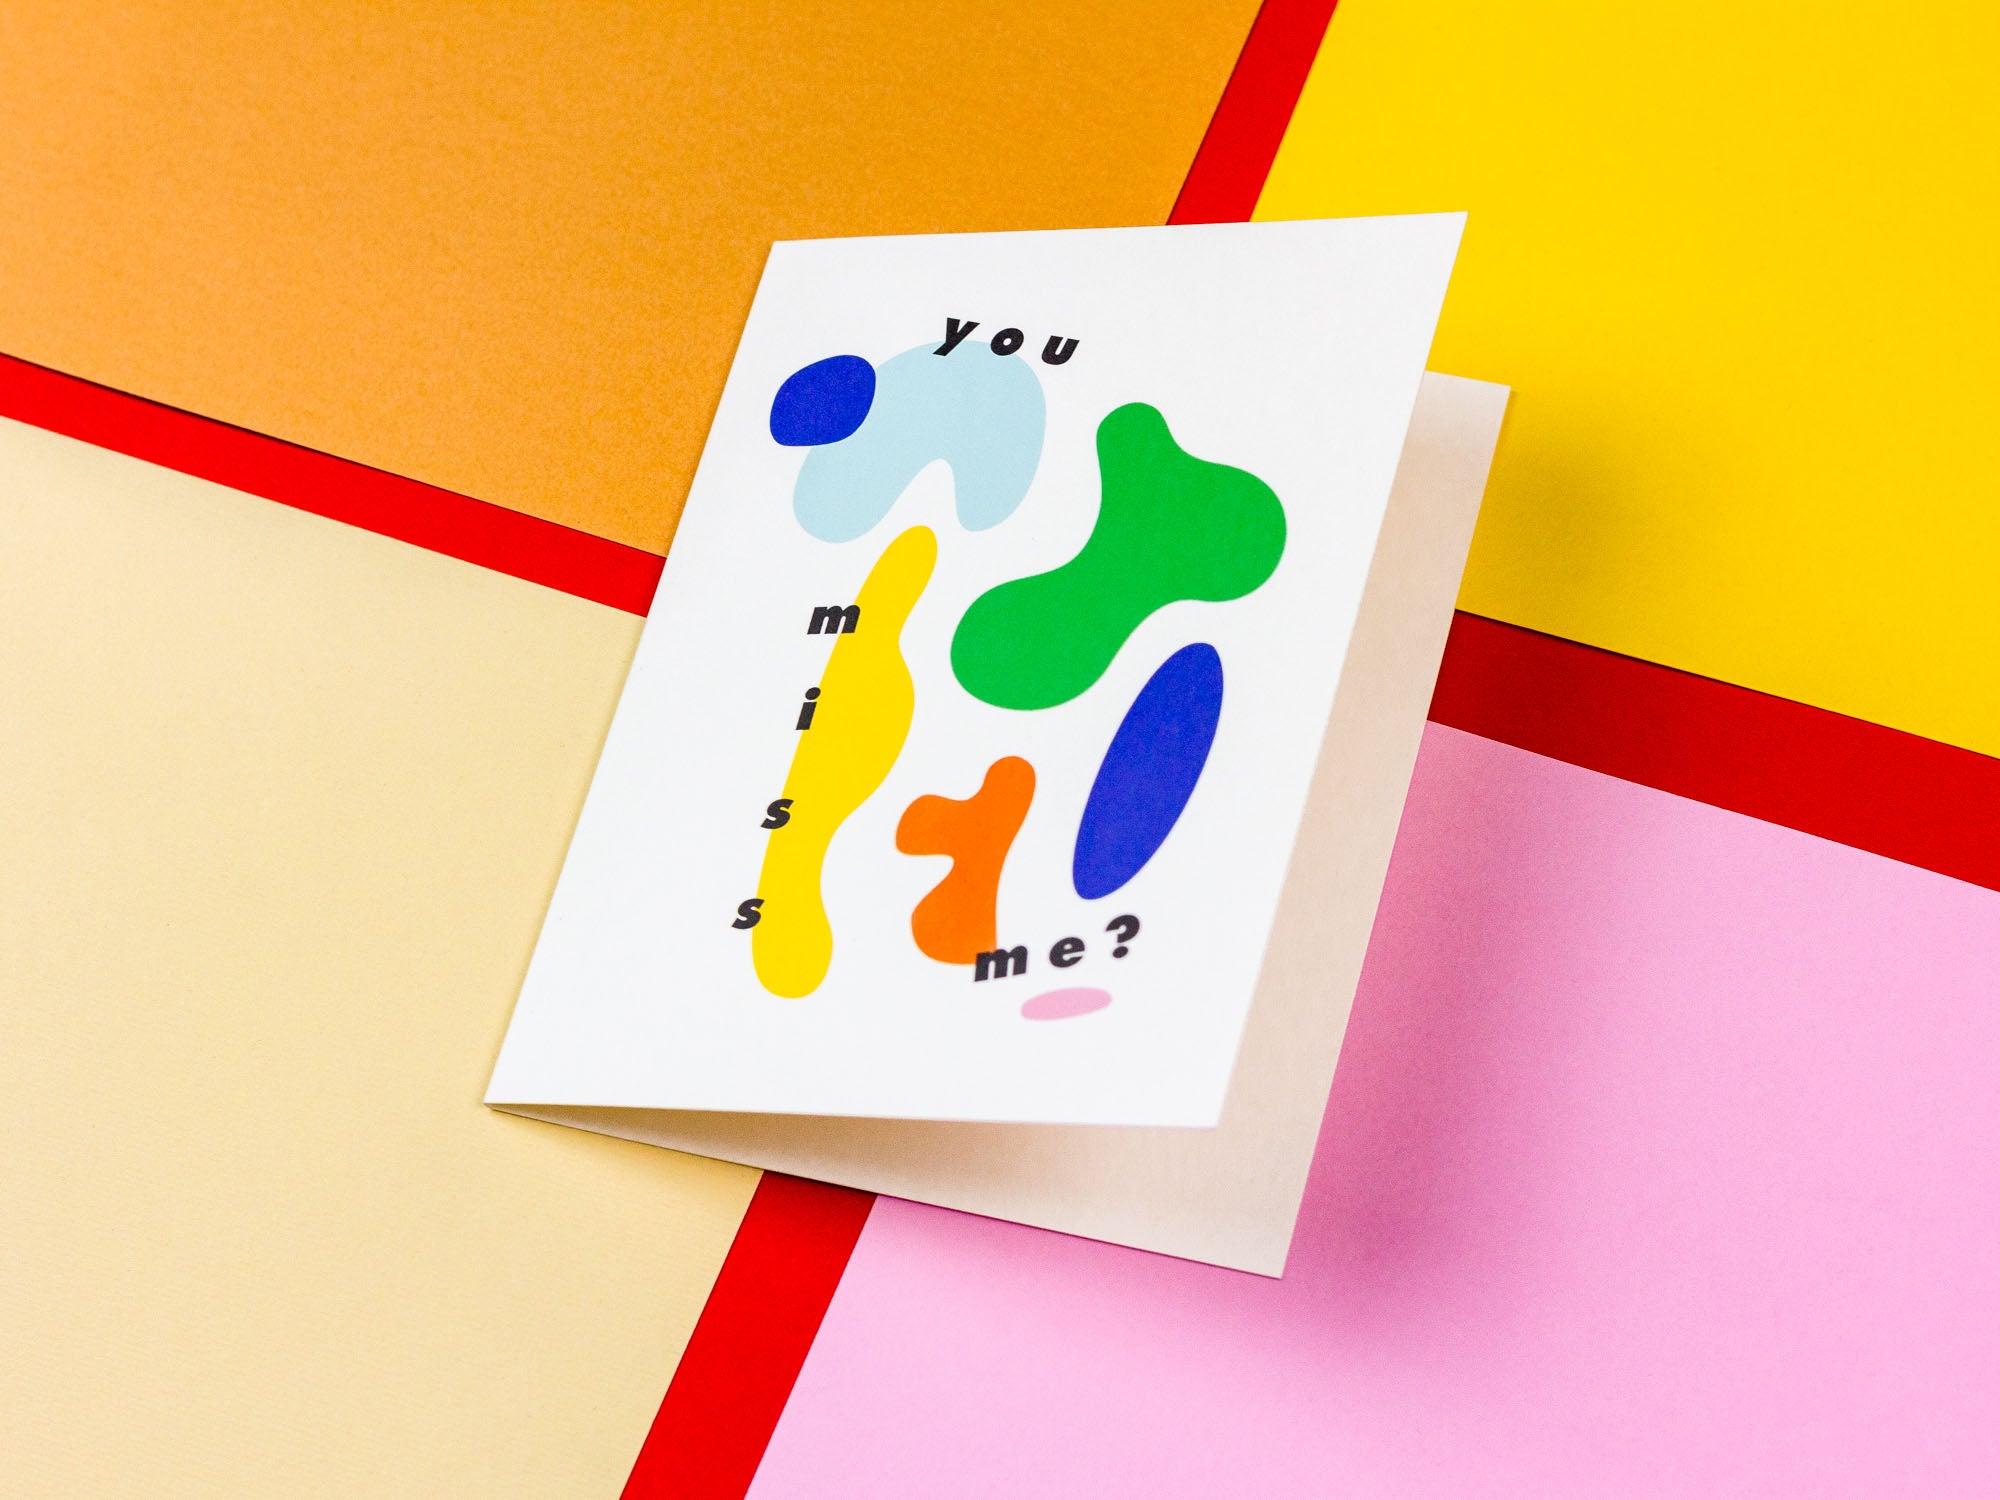 Thinking of you card with colorful abstract shapes by My Darlin' that reads You Miss Me? @mydarlin_bk